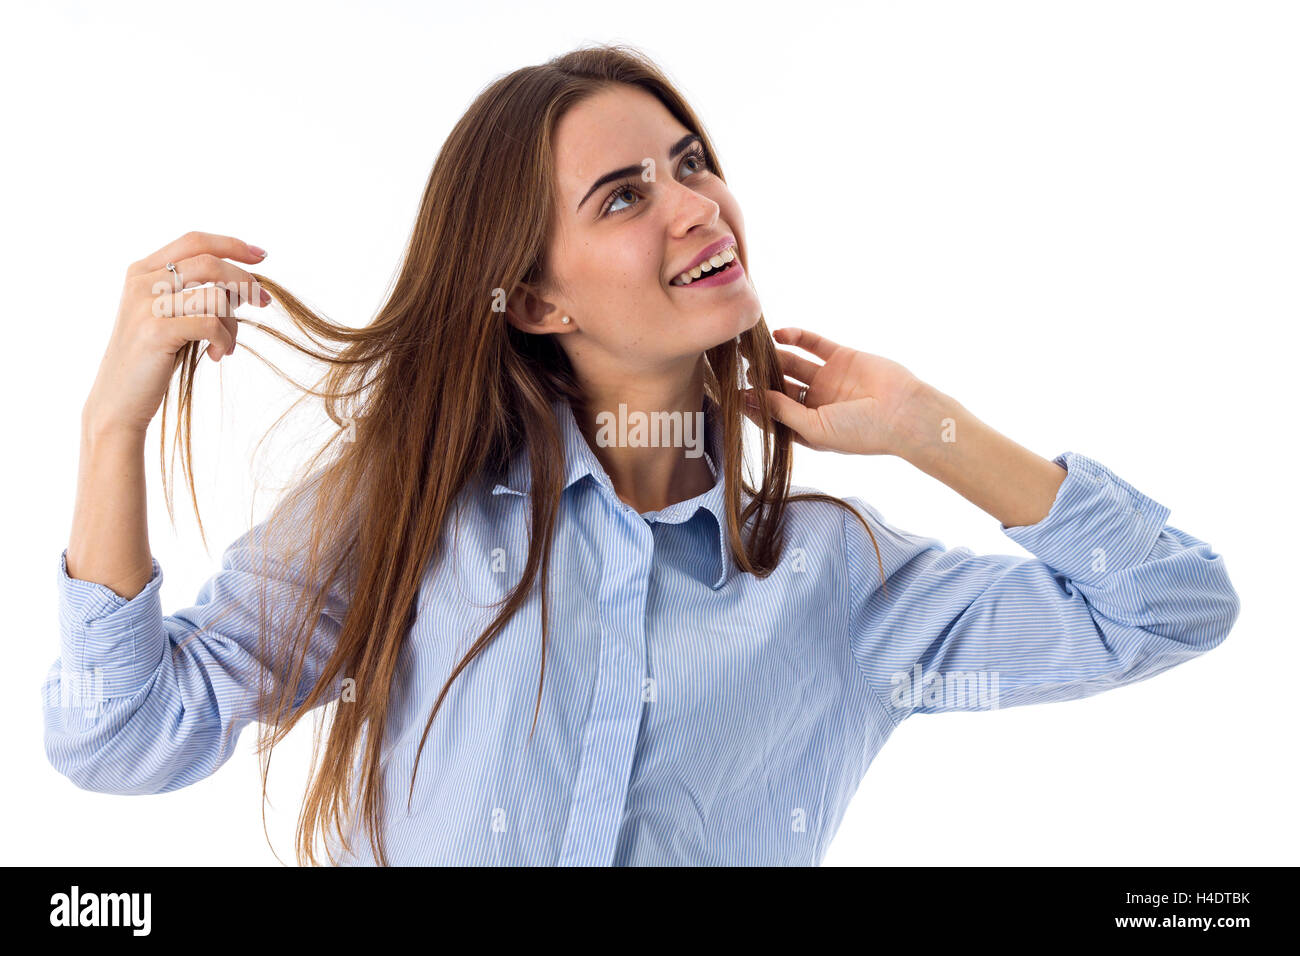 Woman touching her hair Stock Photo